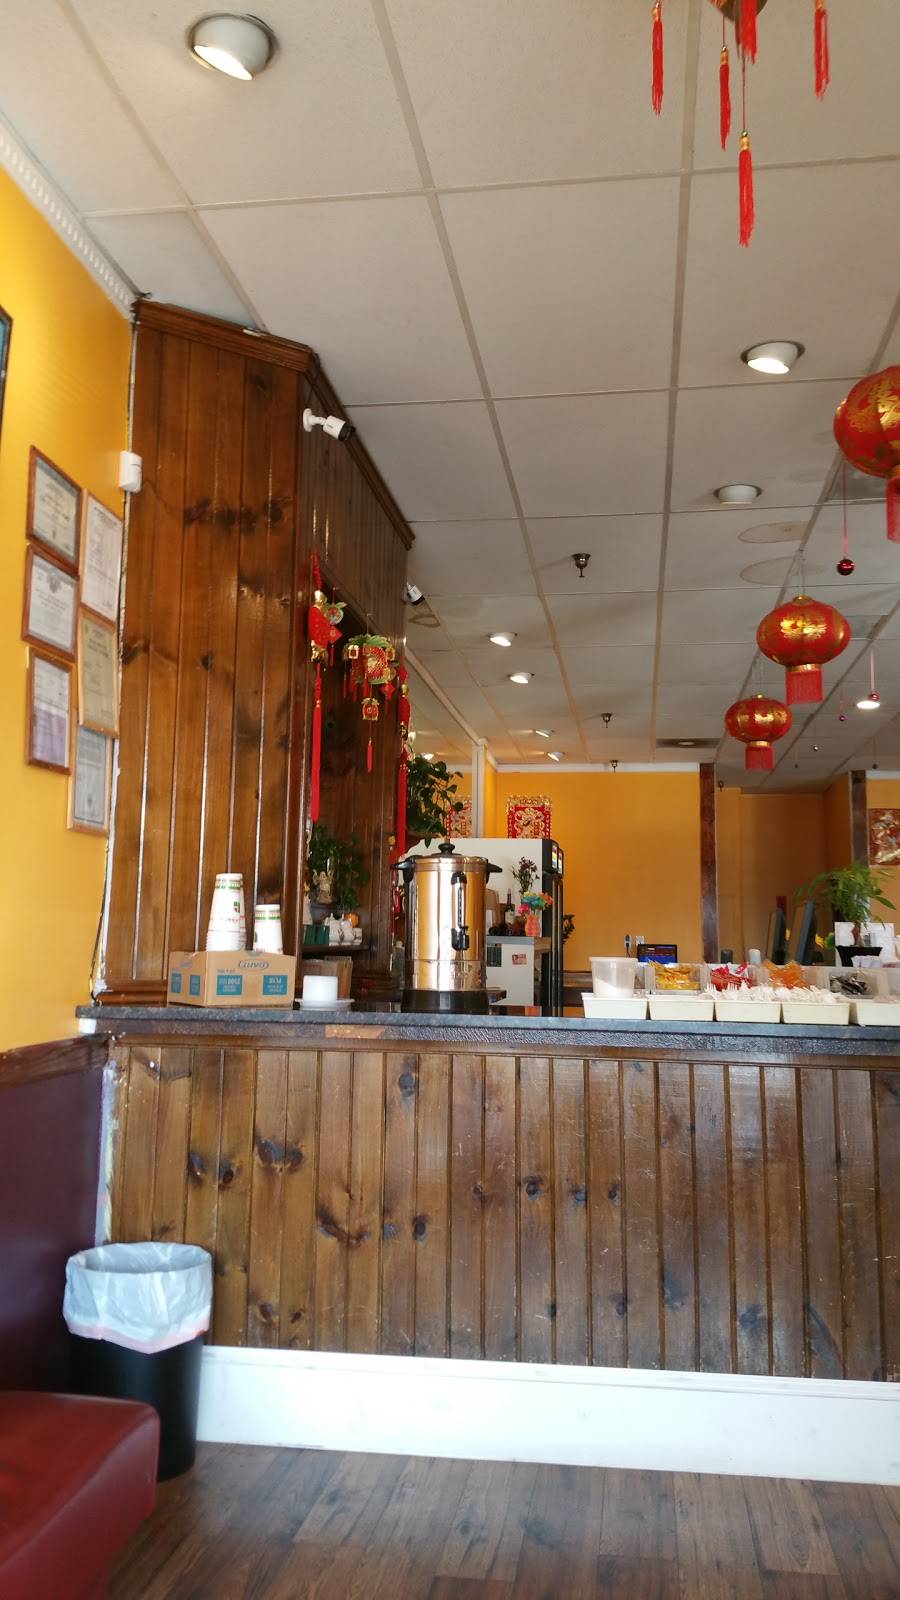 Asia Cafe | restaurant | 12937 Wisteria Dr, Germantown, MD 20874, USA | 3015286610 OR +1 301-528-6610